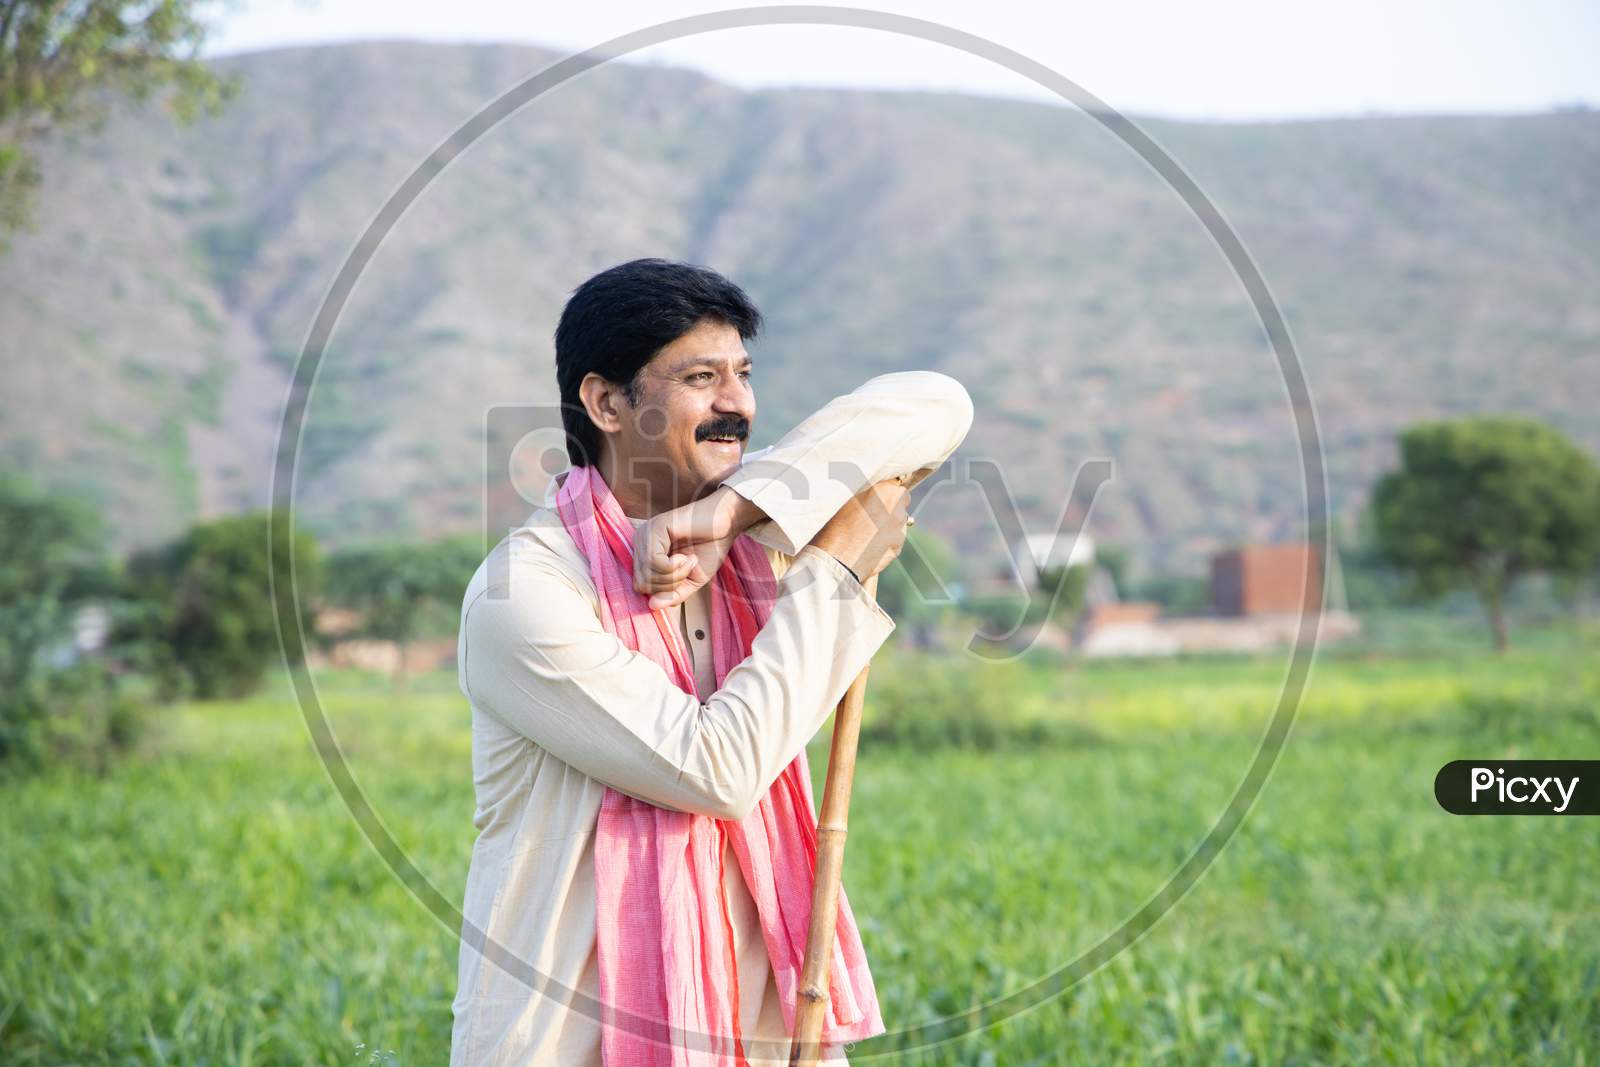 Happy Indian Farmer Holding Wood Stick In Hand Standing In Agriculture Field Wearing Traditional Kurta Dress, Smiling Man With Mustache And Black Hair. Rural India Concept. Copy Space.